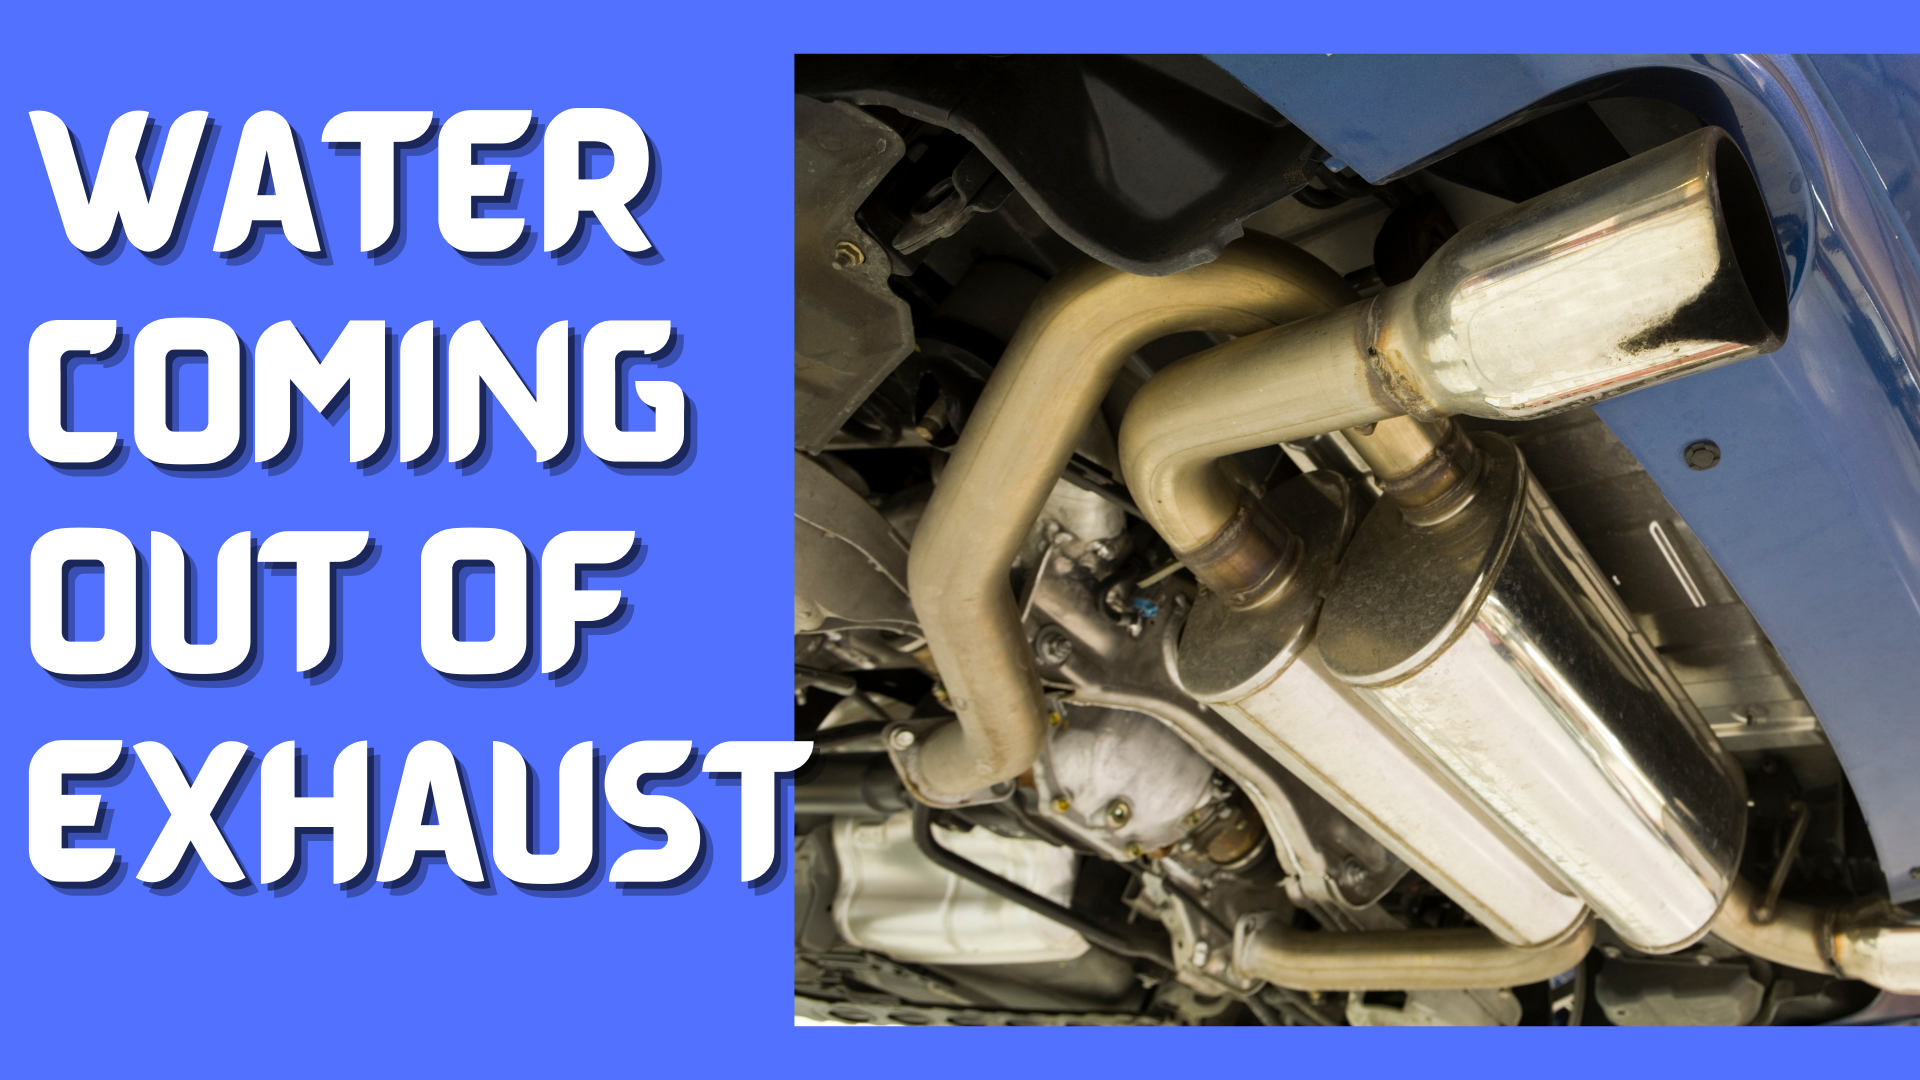 Water Coming Out of Exhaust – Why Water Is Coming Out of My Truck Exhaust?